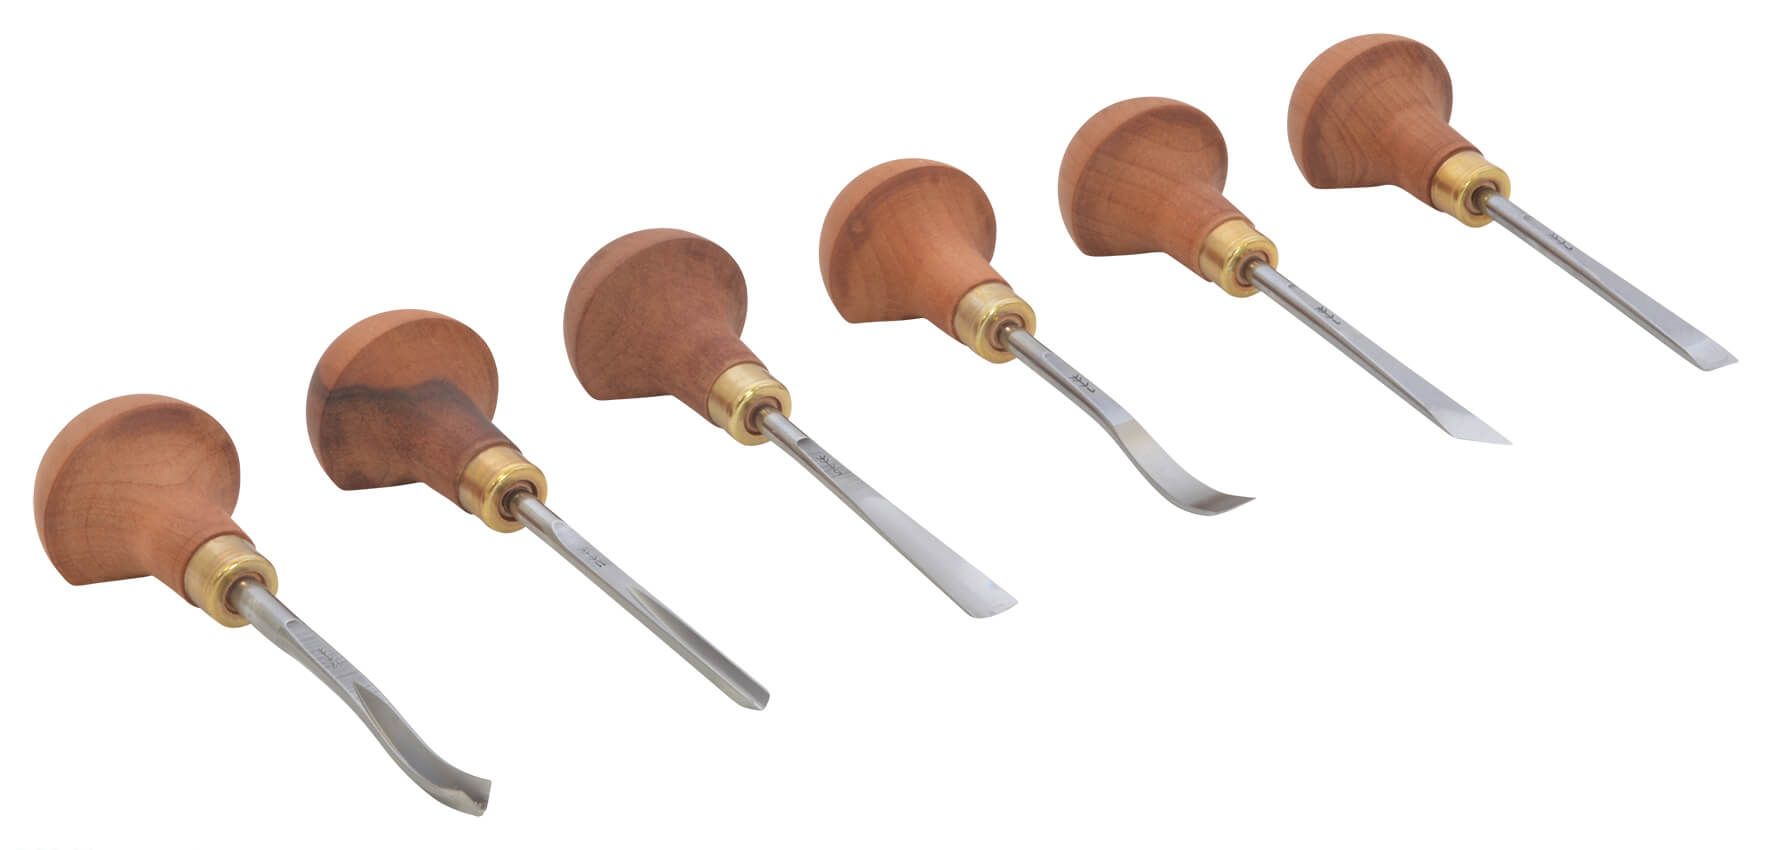 Palm Carving Tools, Set A by Pfeil